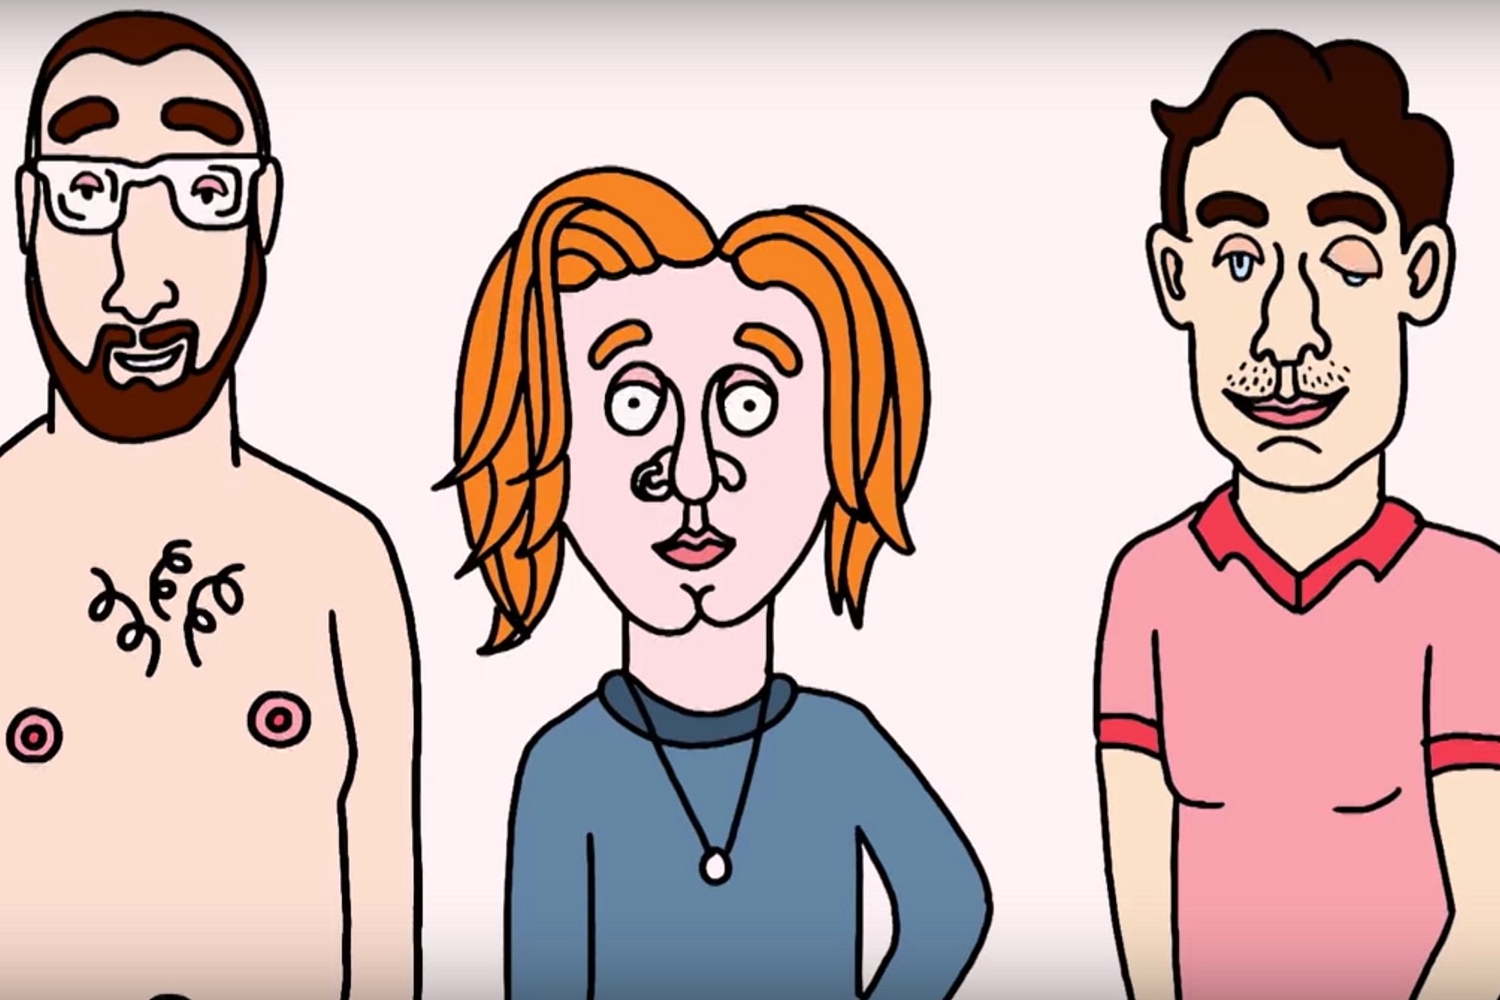 Two Door Cinema Club channel arcade games for ‘Bad Decisions’ video